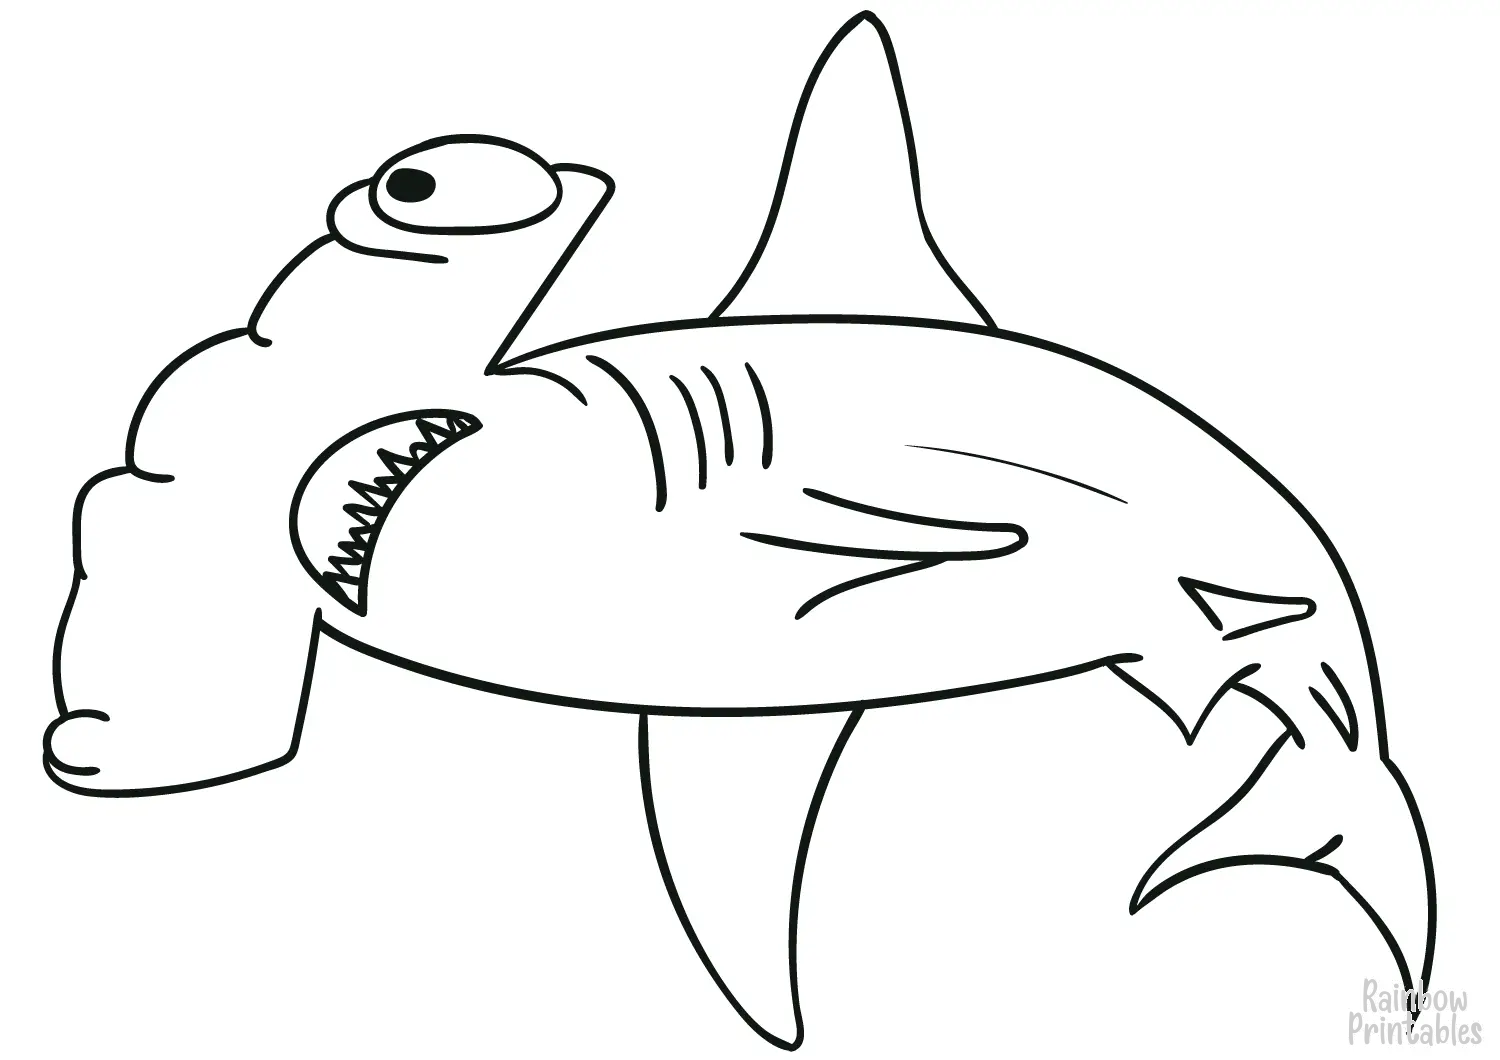 SIMPLE-EASY-line-drawings-HAMMERHEAD-SHARK-coloring-page-for-kids